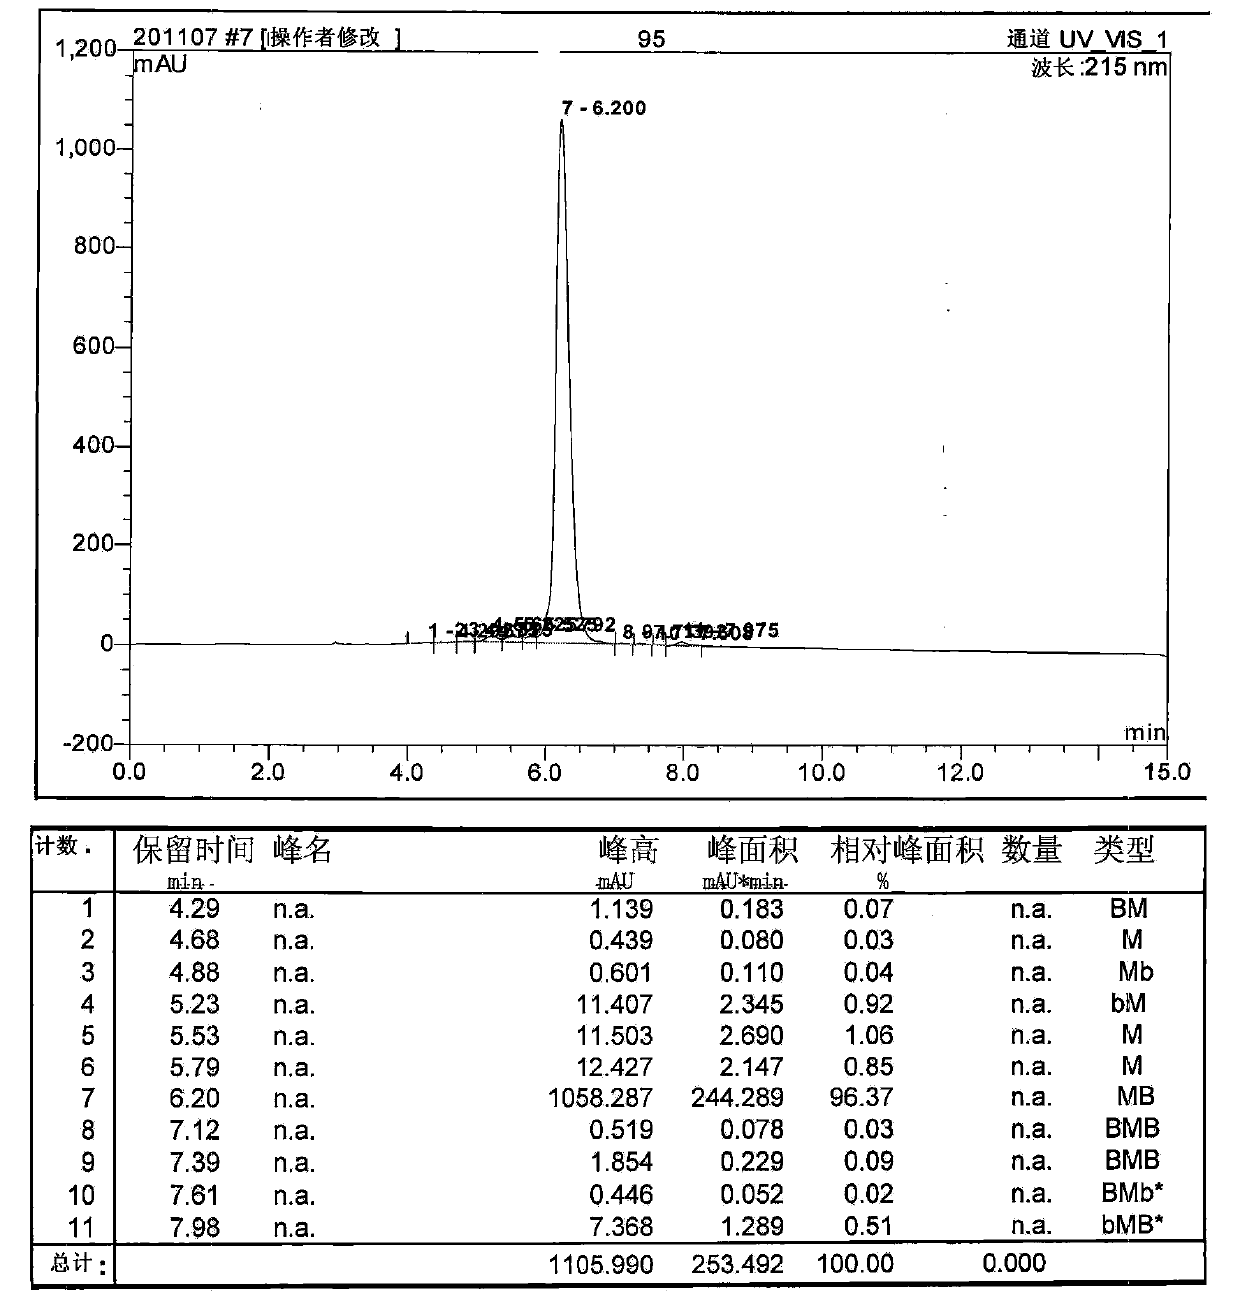 Polypeptide as well as detection device and detection reagent kit comprising polypeptide